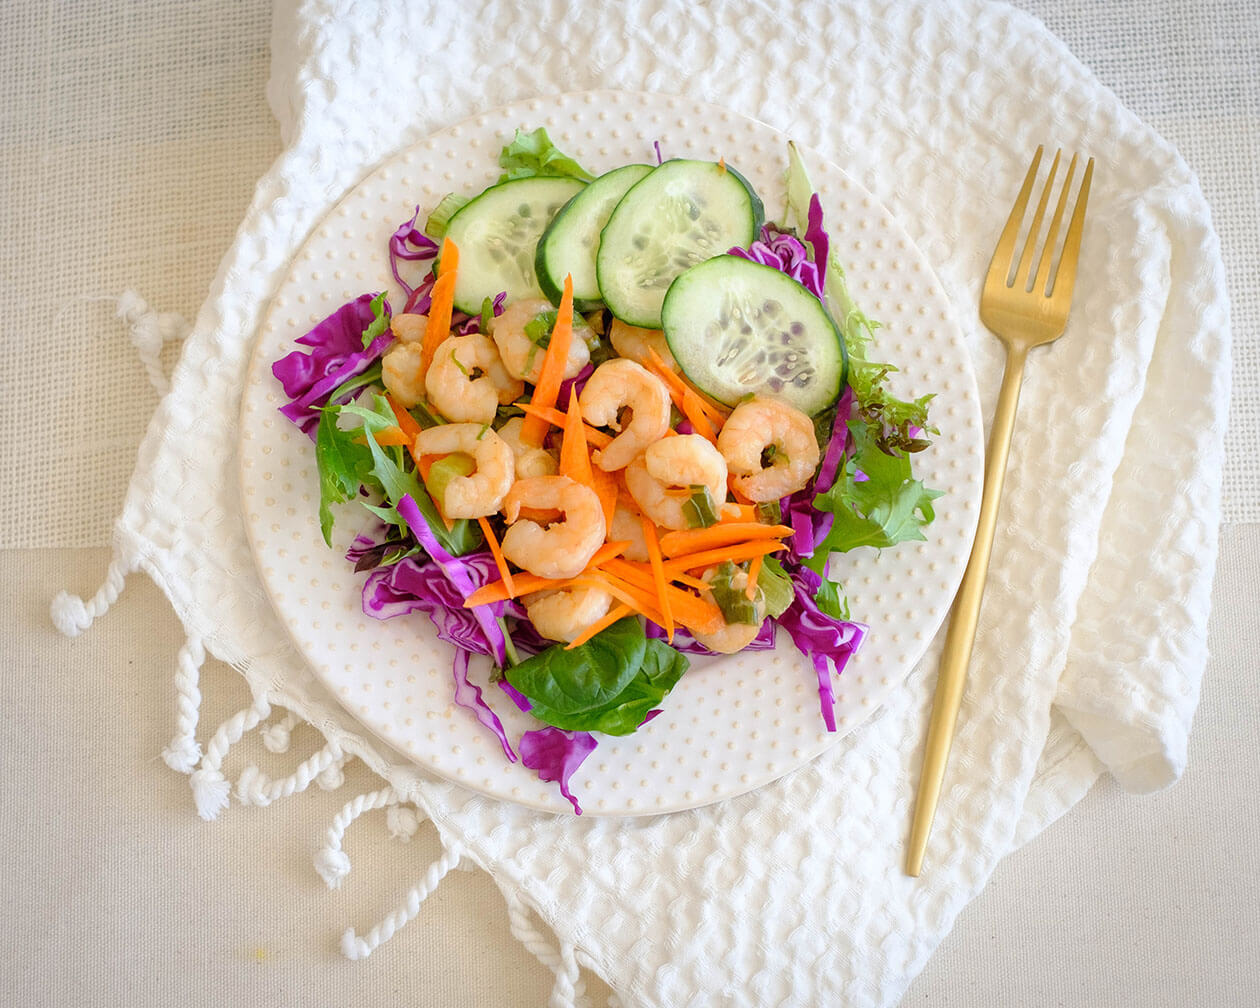 round plate with salad, shrimp, and cucumbers, and carrots, and purple cabbage